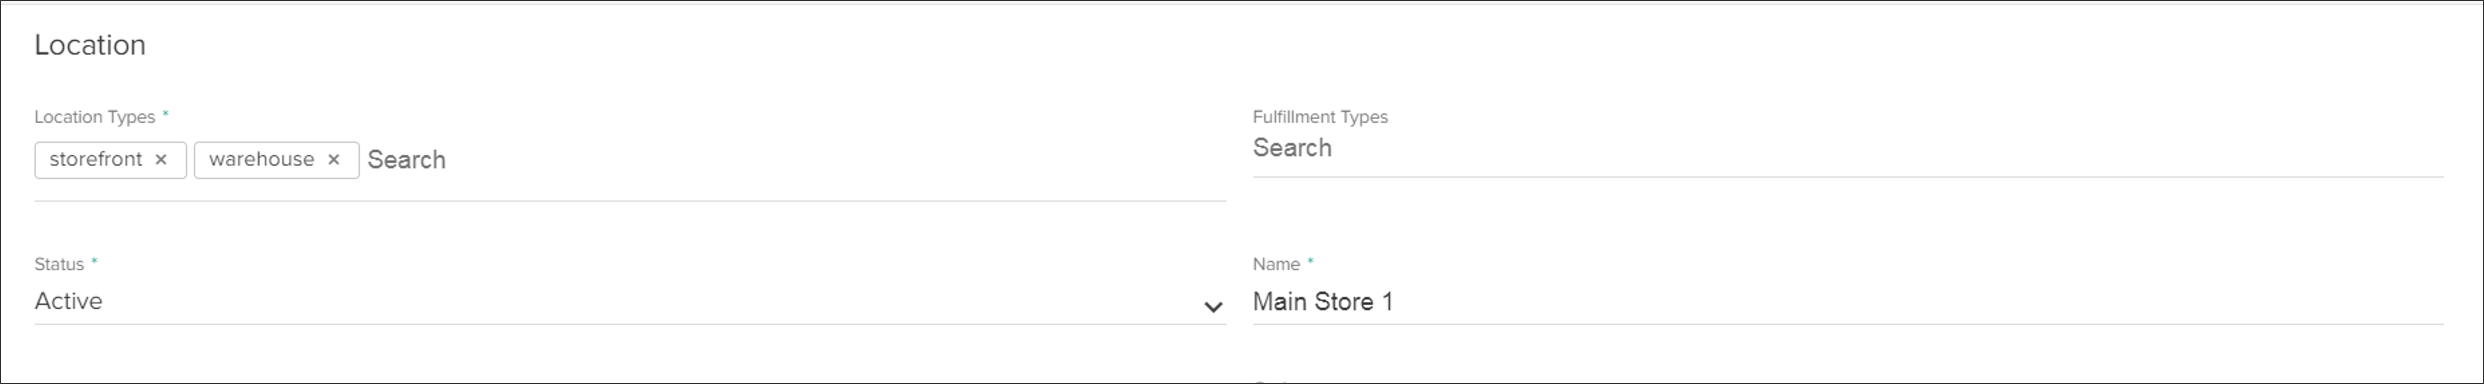 Close-up of the Location configuration options where fulfillment types can be selected